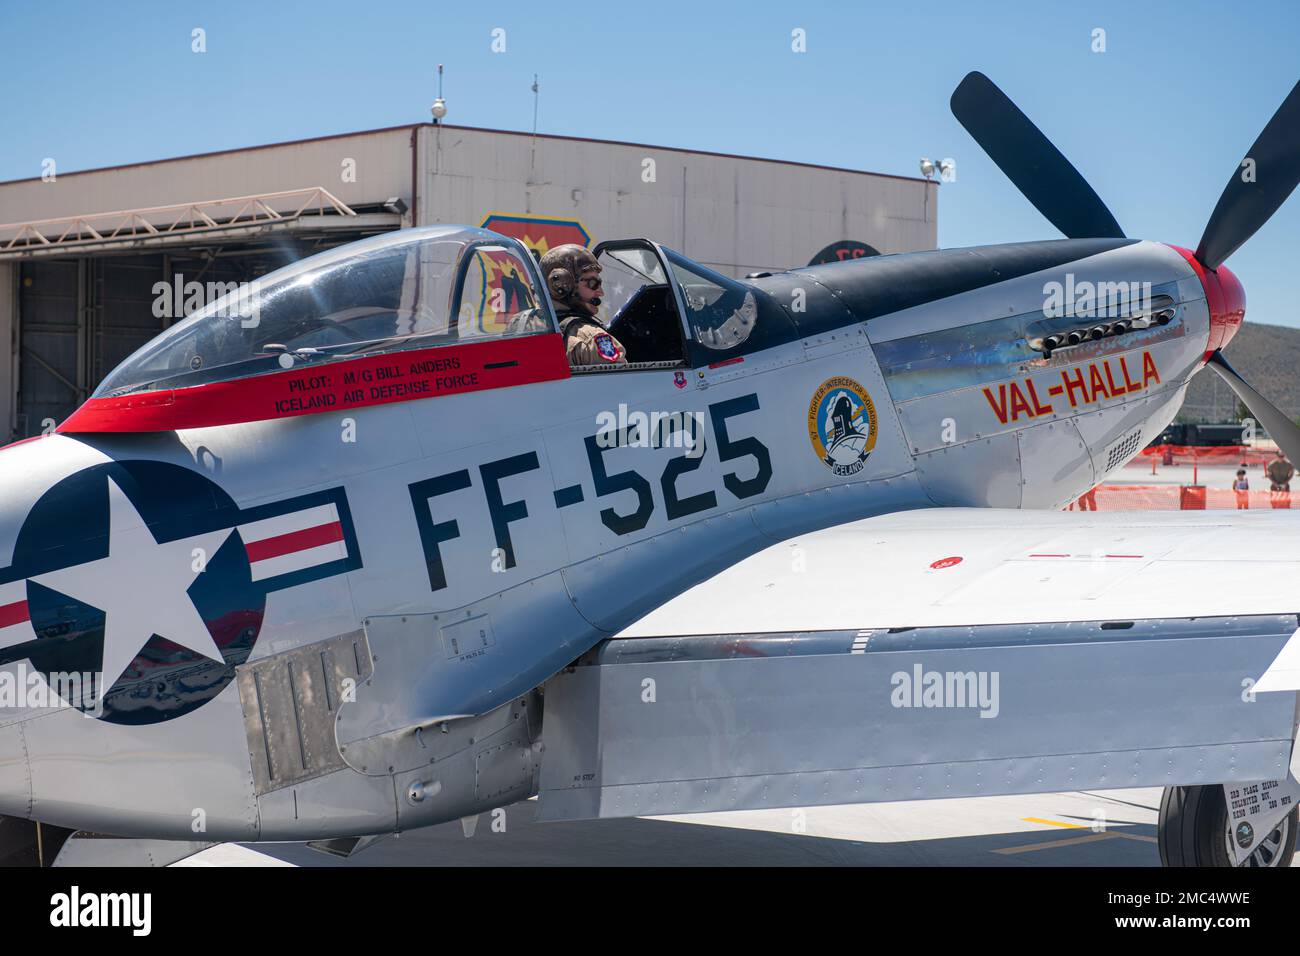 A P-51 Mustang sits on the ramp in Klamath Falls, Oregon, June 24, 2022.  The P-51 flew alongside a U.S. Air Force A-10 Thunderbolt II as part of a  Heritage Flight formation.